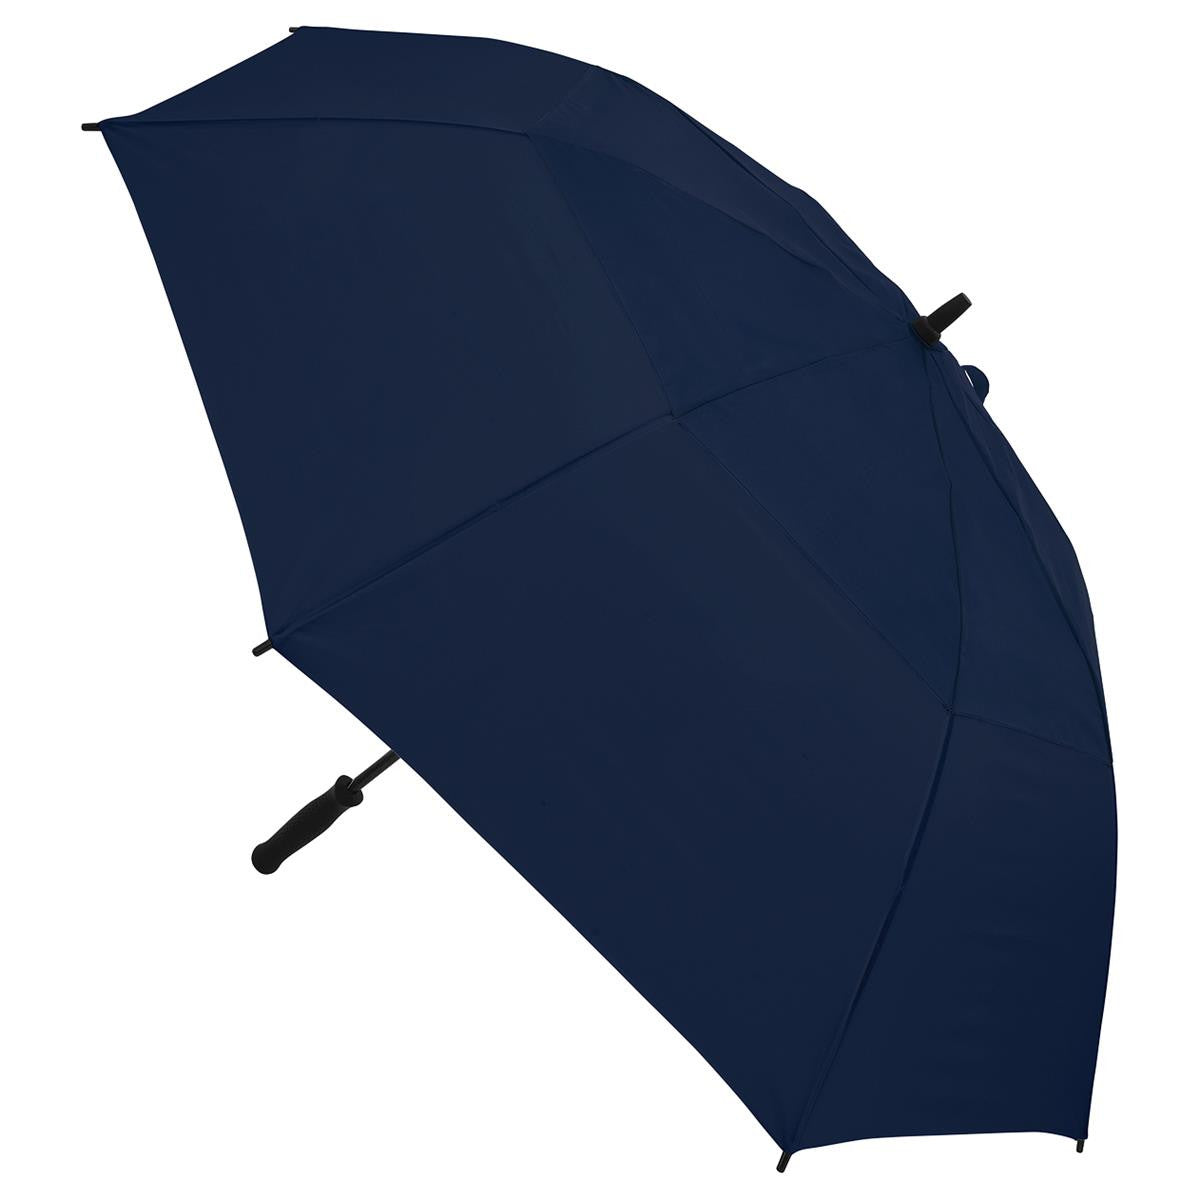 UMBRA®️ Sovereign - Heavy Duty Sports Umbrella With Double Layer Wind/Vent System, Superior Pongee Fabric - Auto-Open Push Button Feature